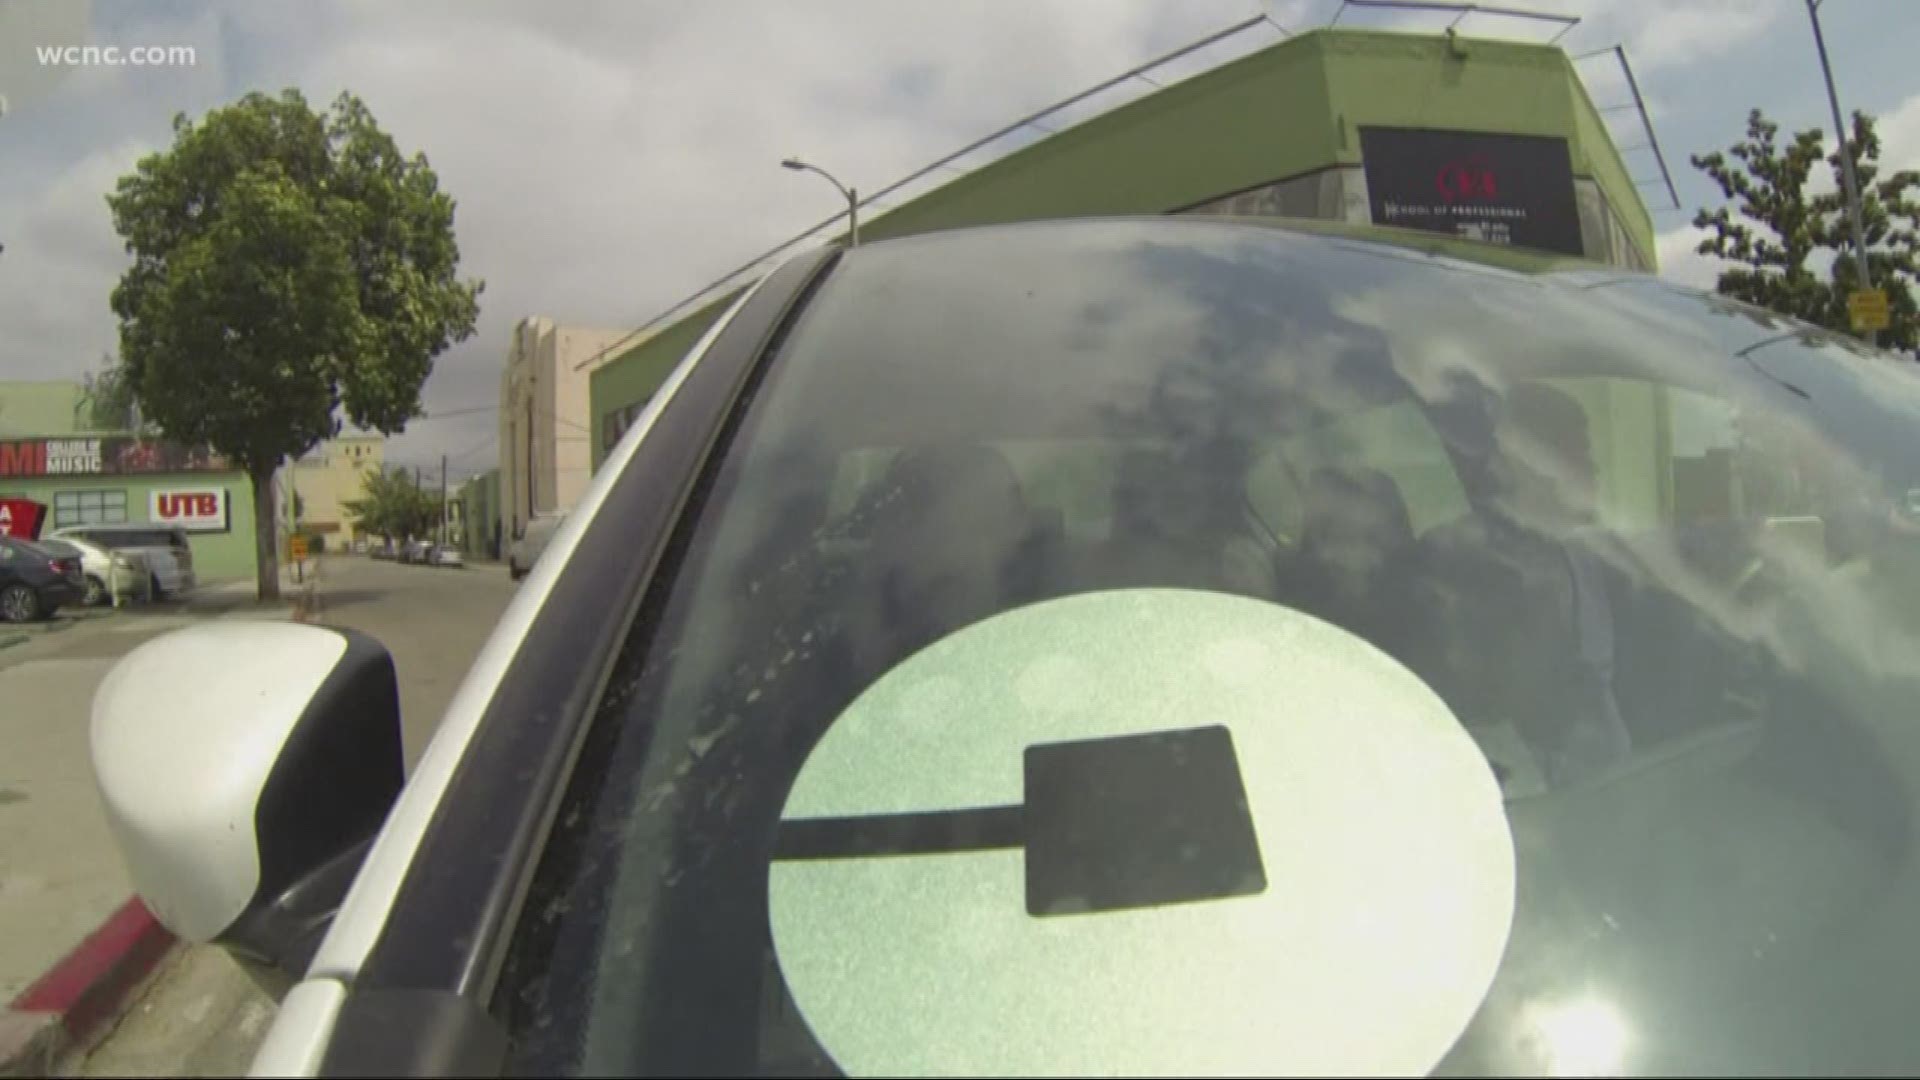 Ride-sharing company Uber is helping get people to the polls with free rides.